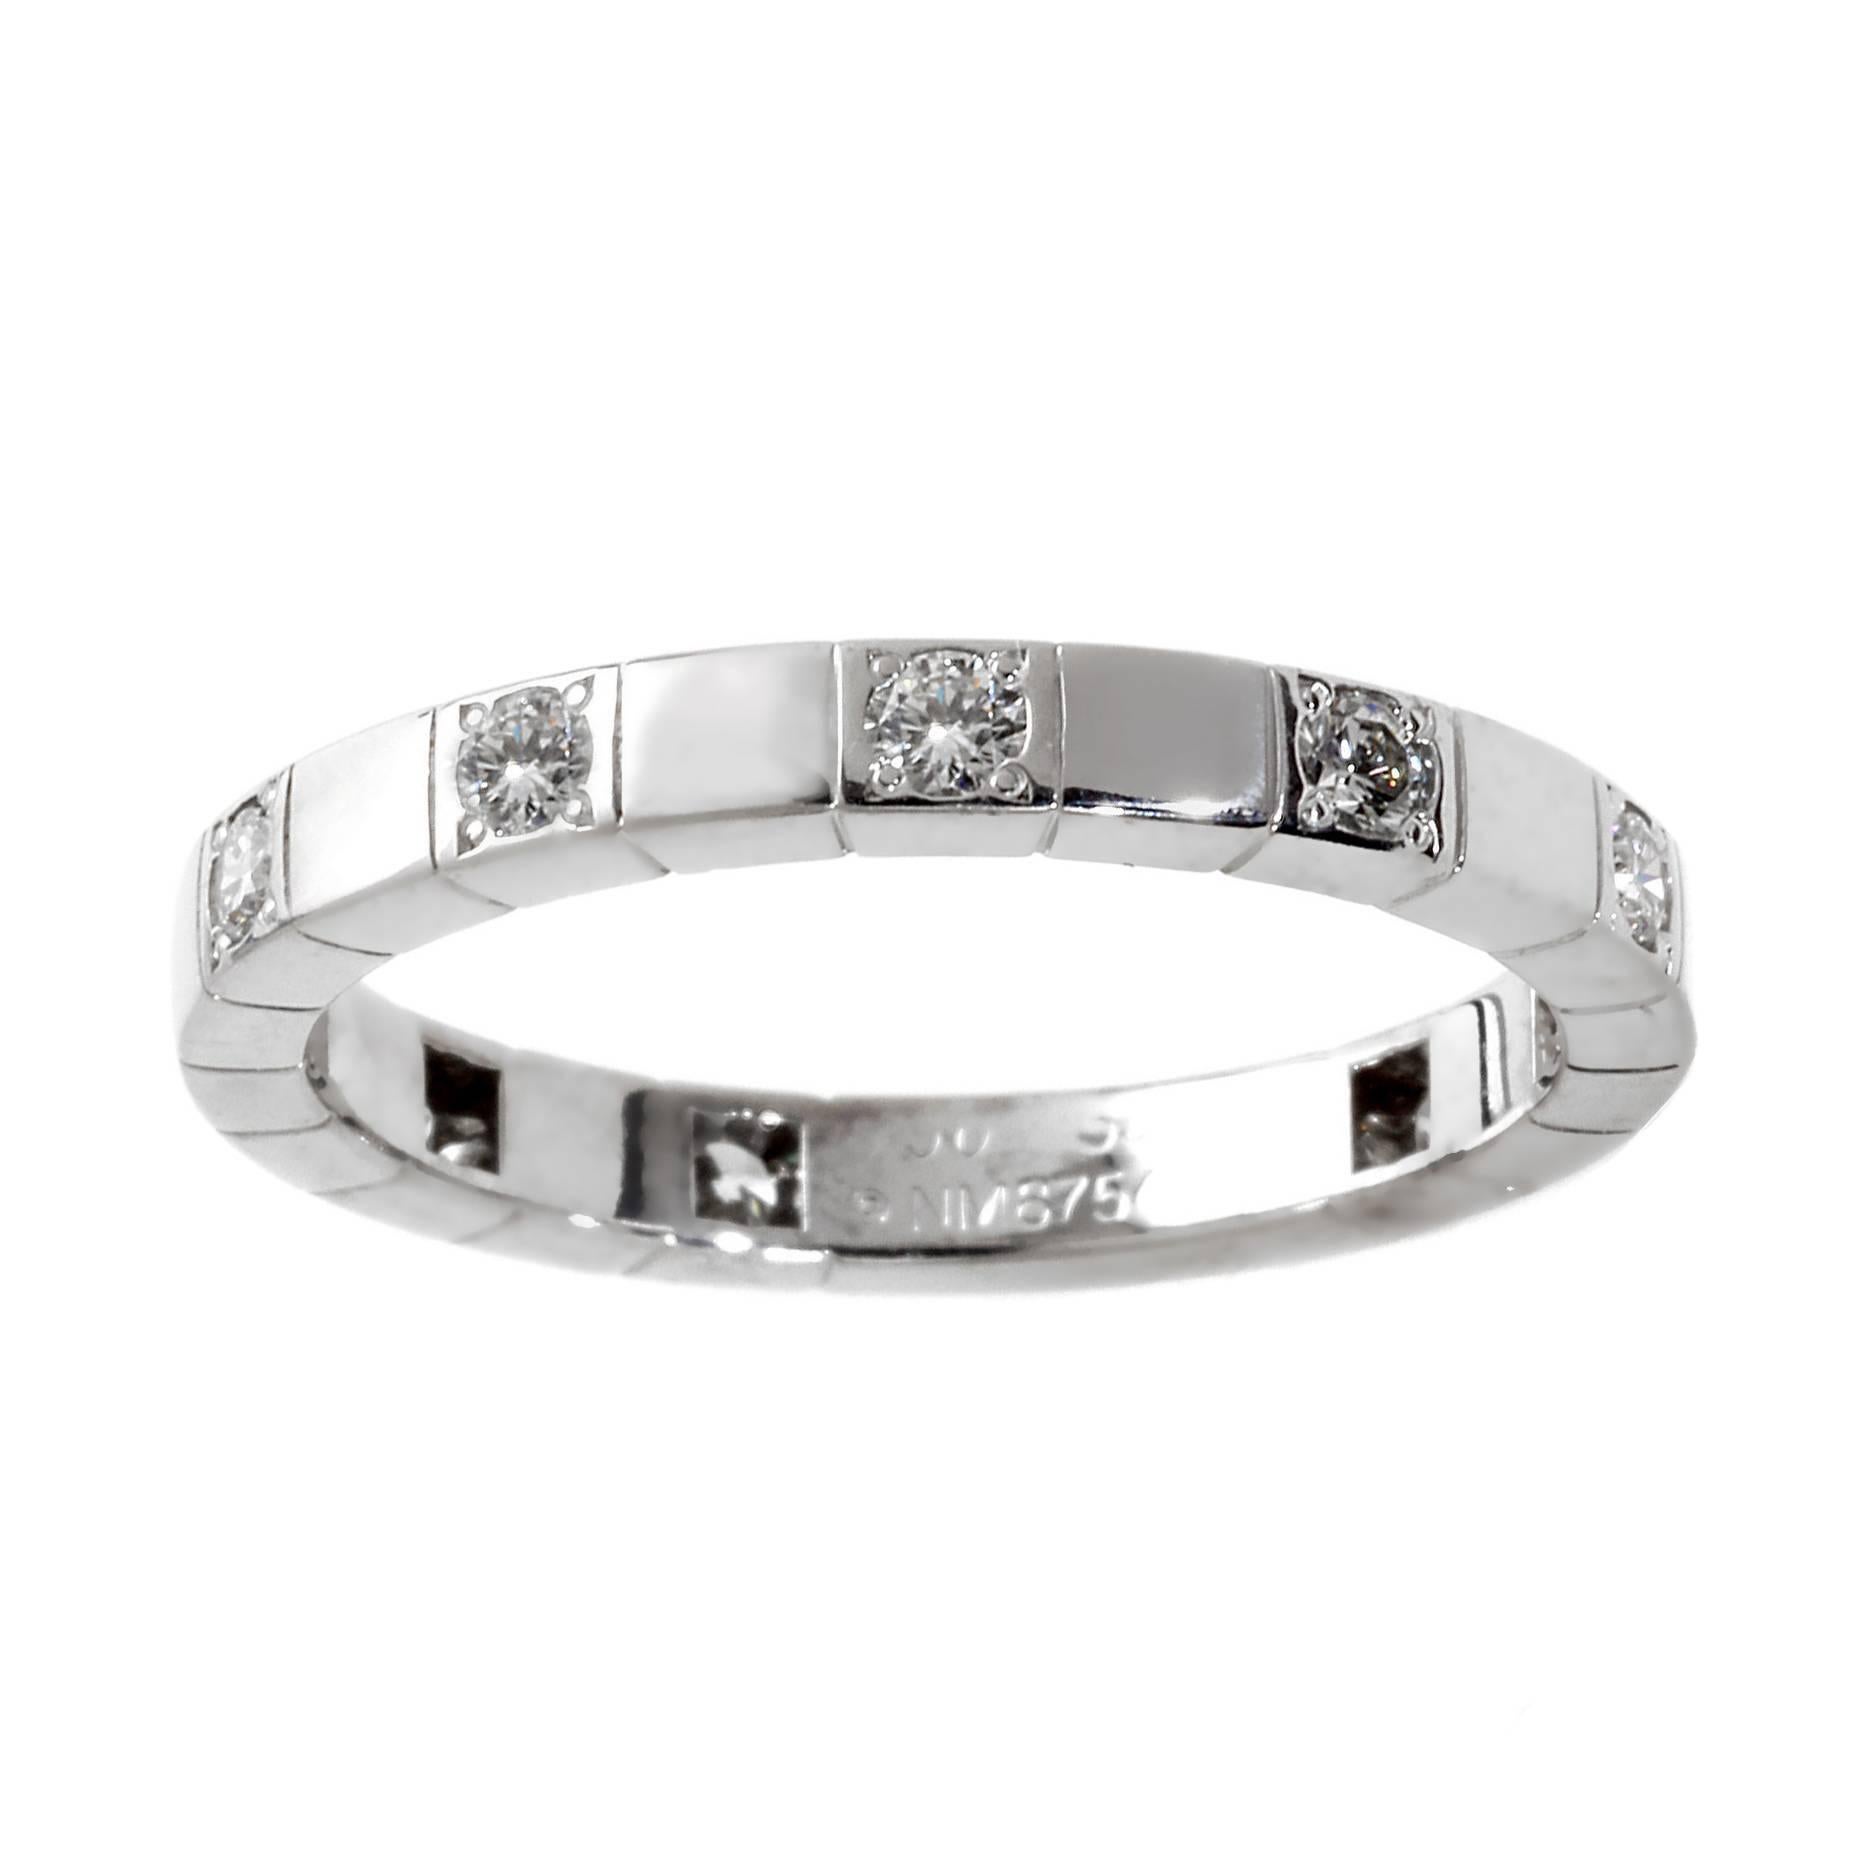 A timeless Cartier diamond band featuring 9 of the finest Cartier round brilliant cut diamonds in 18k white gold. Dimensions: 3mm Wide (.11″ Inches) Size: US 8 3/4 / EU 58

This magnificent piece is offered by Opulent Jewelers, we are an accredited